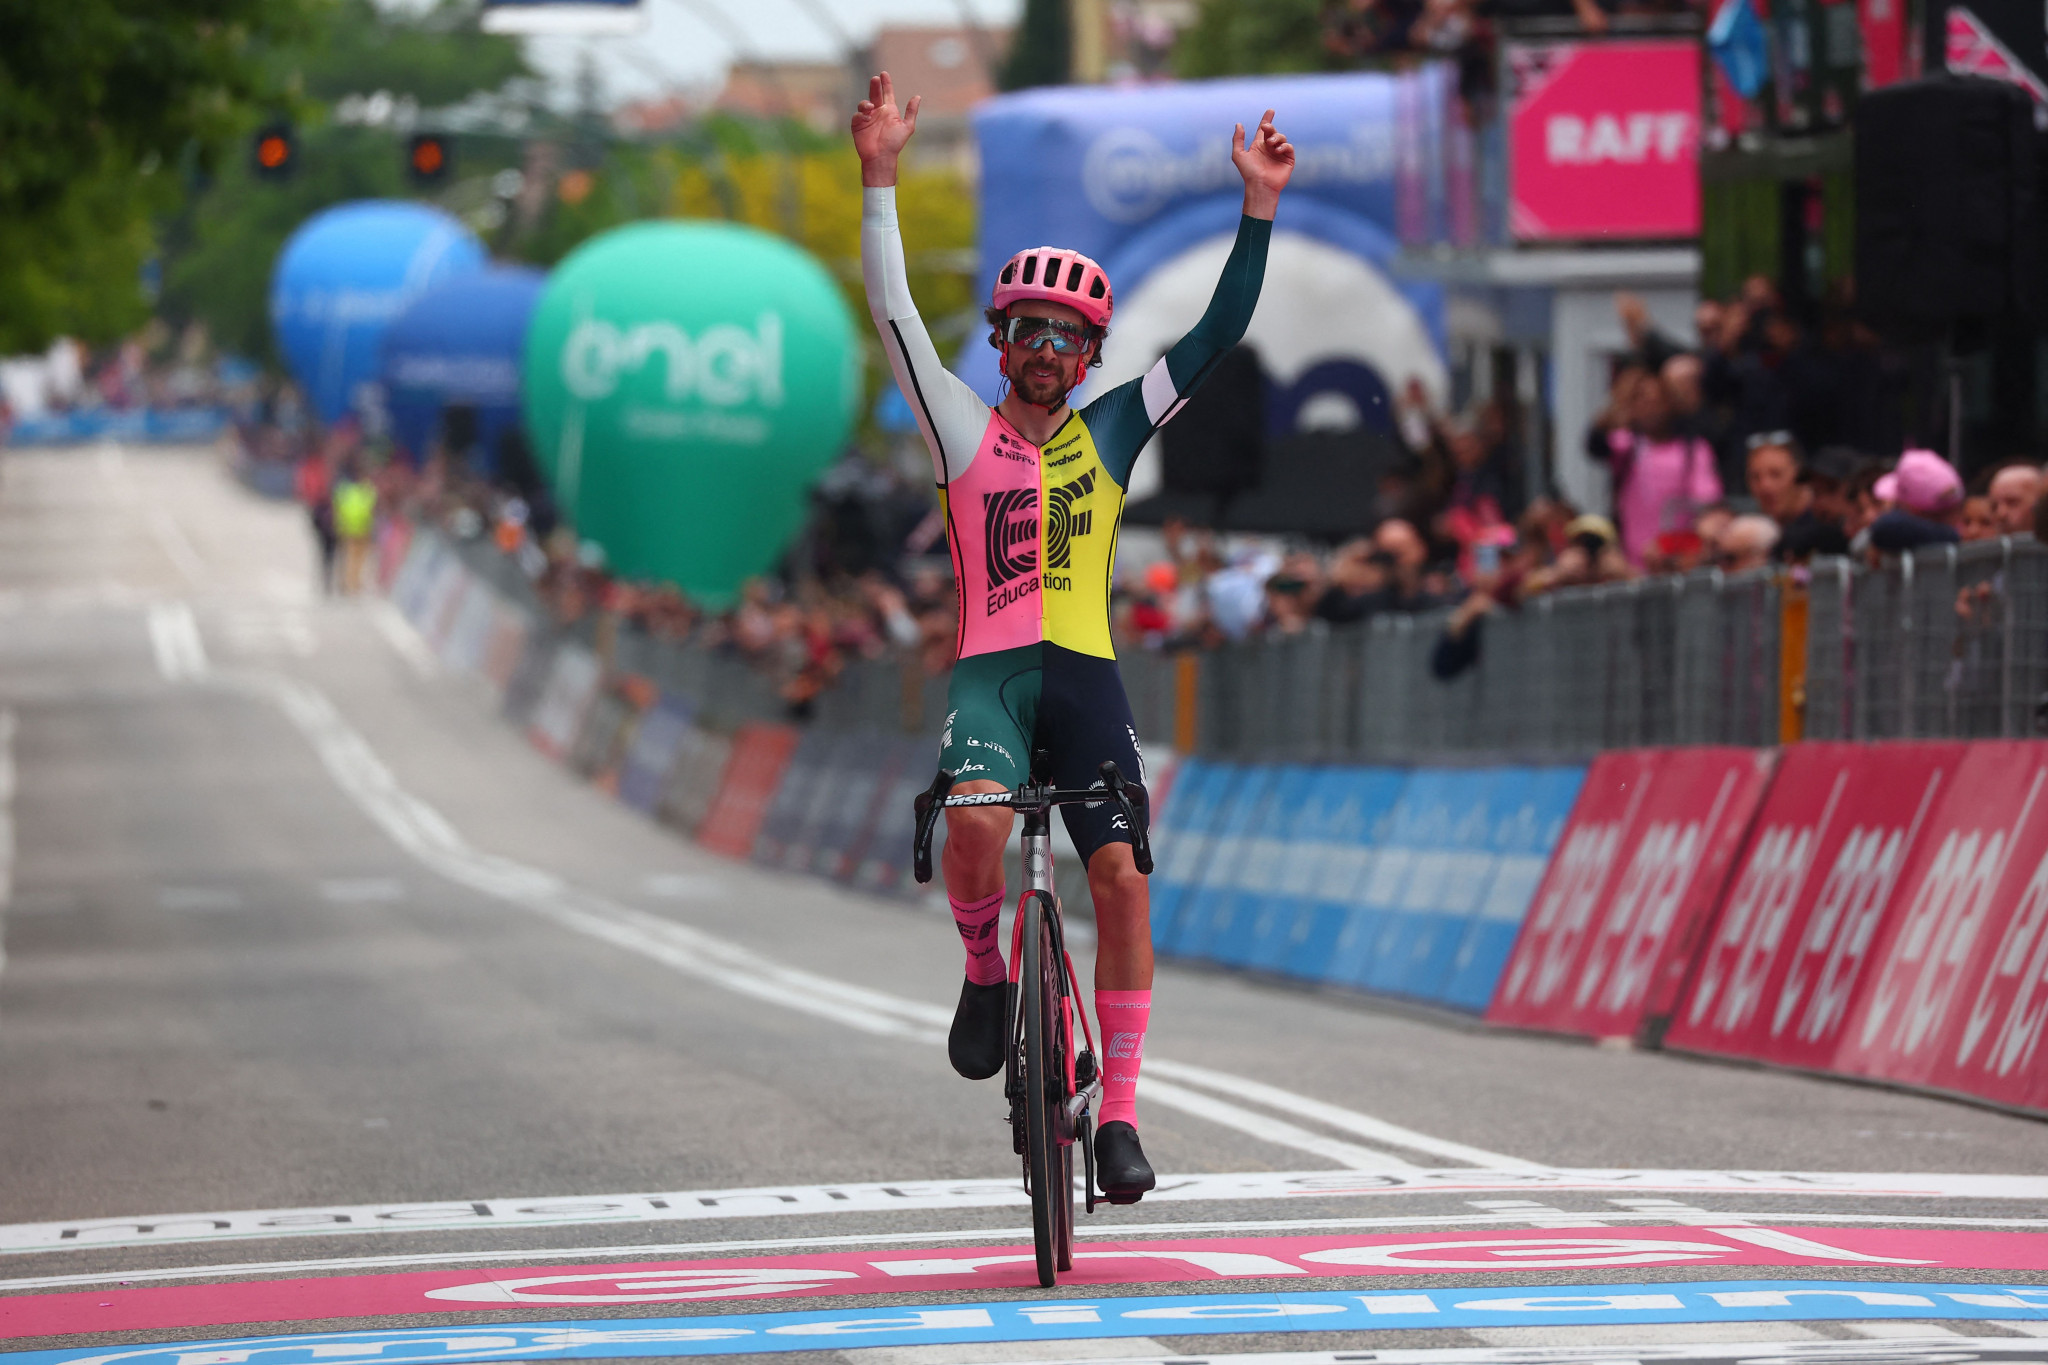 Healy claims first Grand Tour stage win at Giro d’Italia as Leknessund retains overall lead